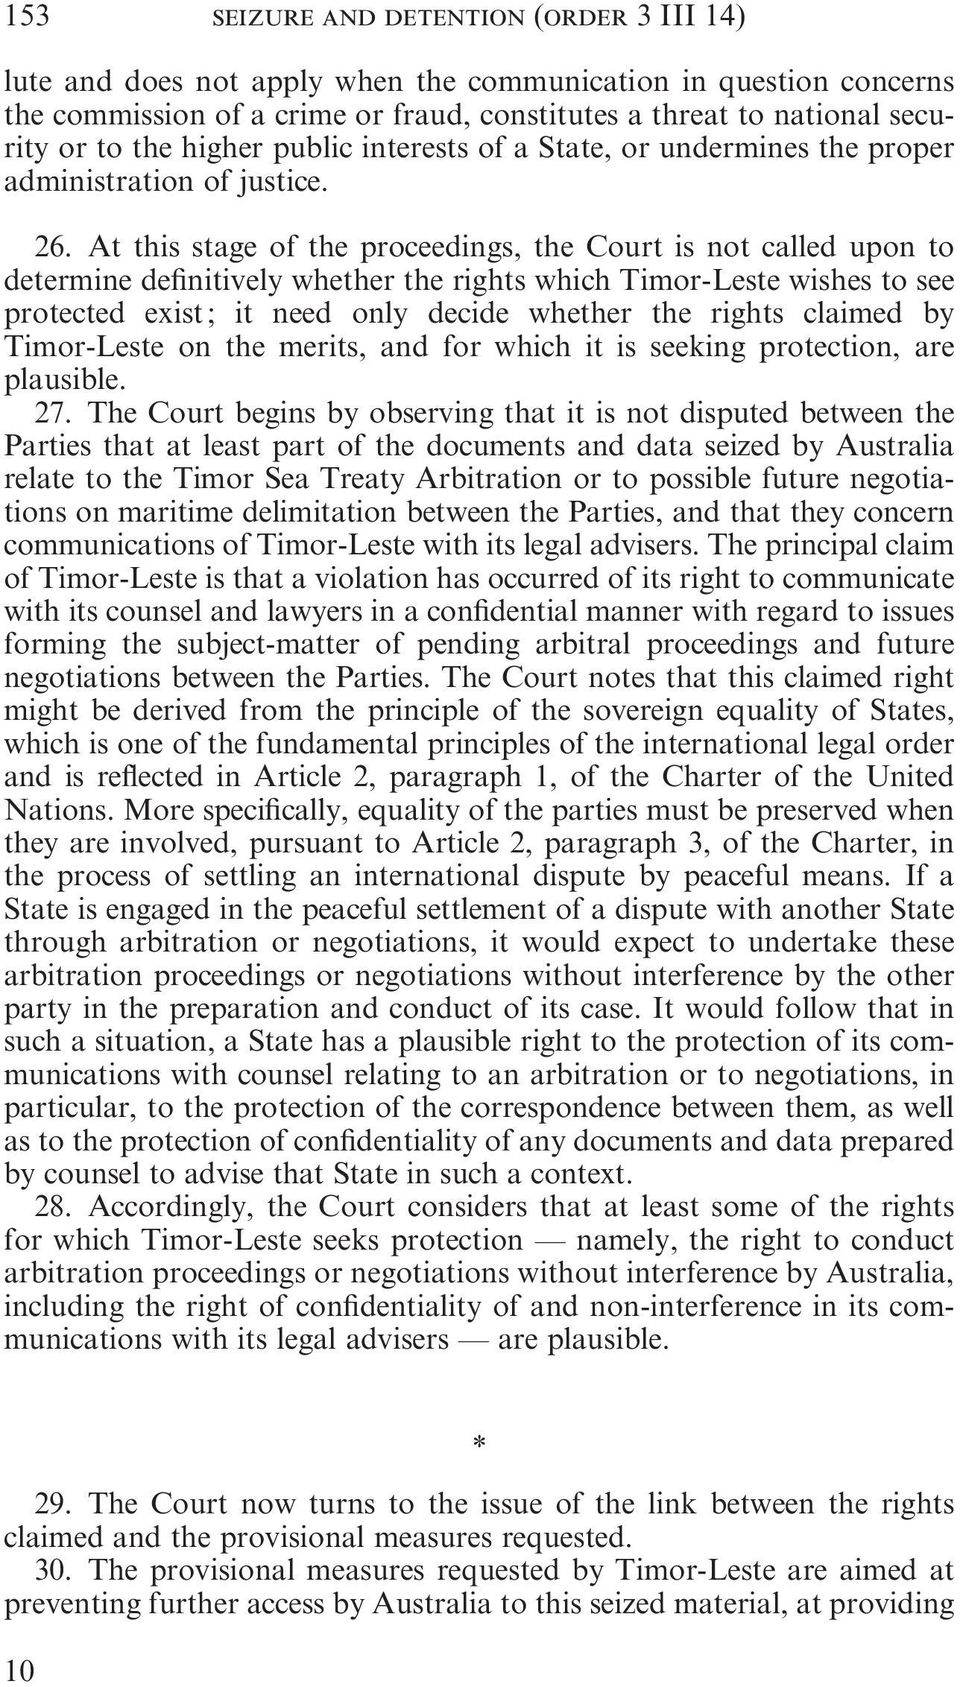 At this stage of the proceedings, the Court is not called upon to determine definitively whether the rights which Timor Leste wishes to see protected exist ; it need only decide whether the rights